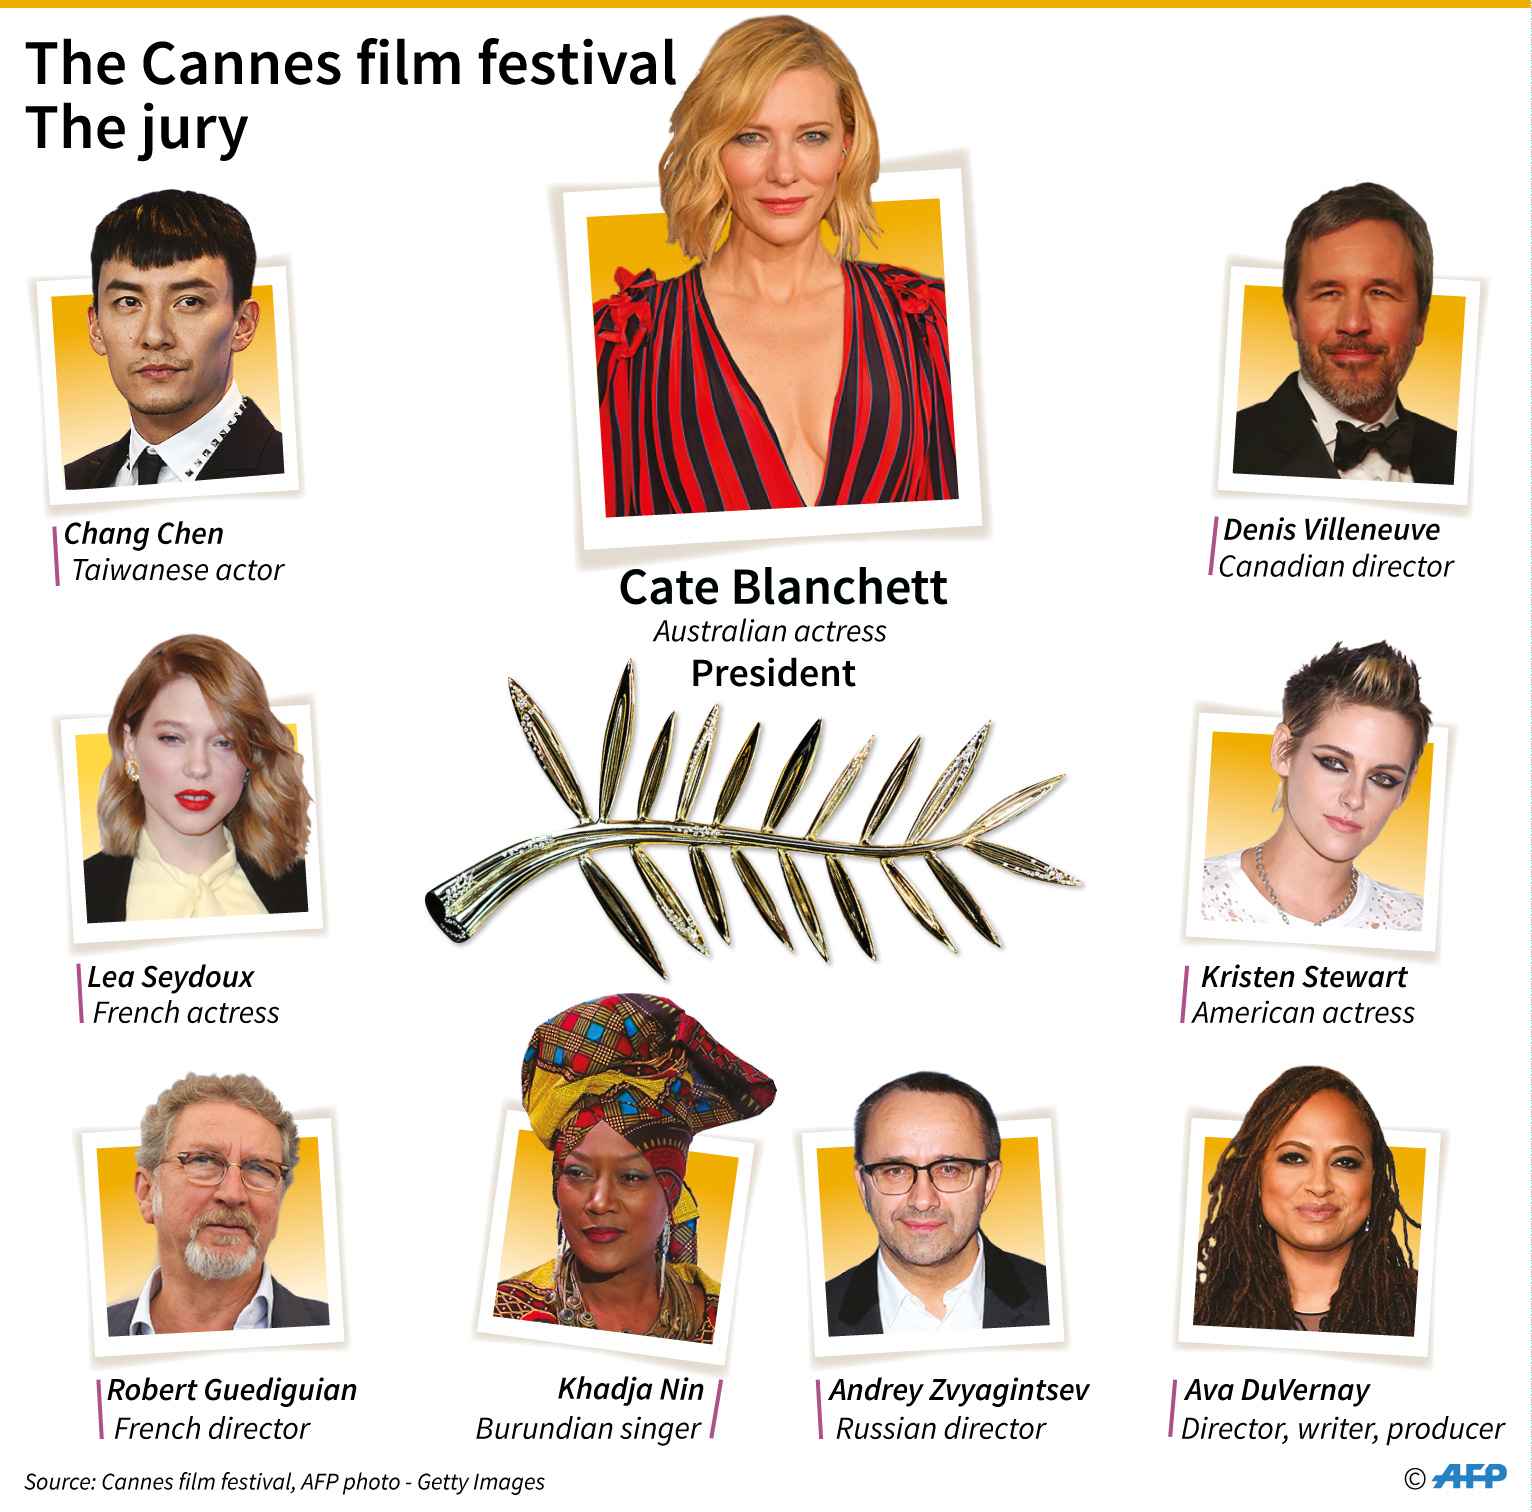 Who’s who in the Cannes film festival jury Eagle News